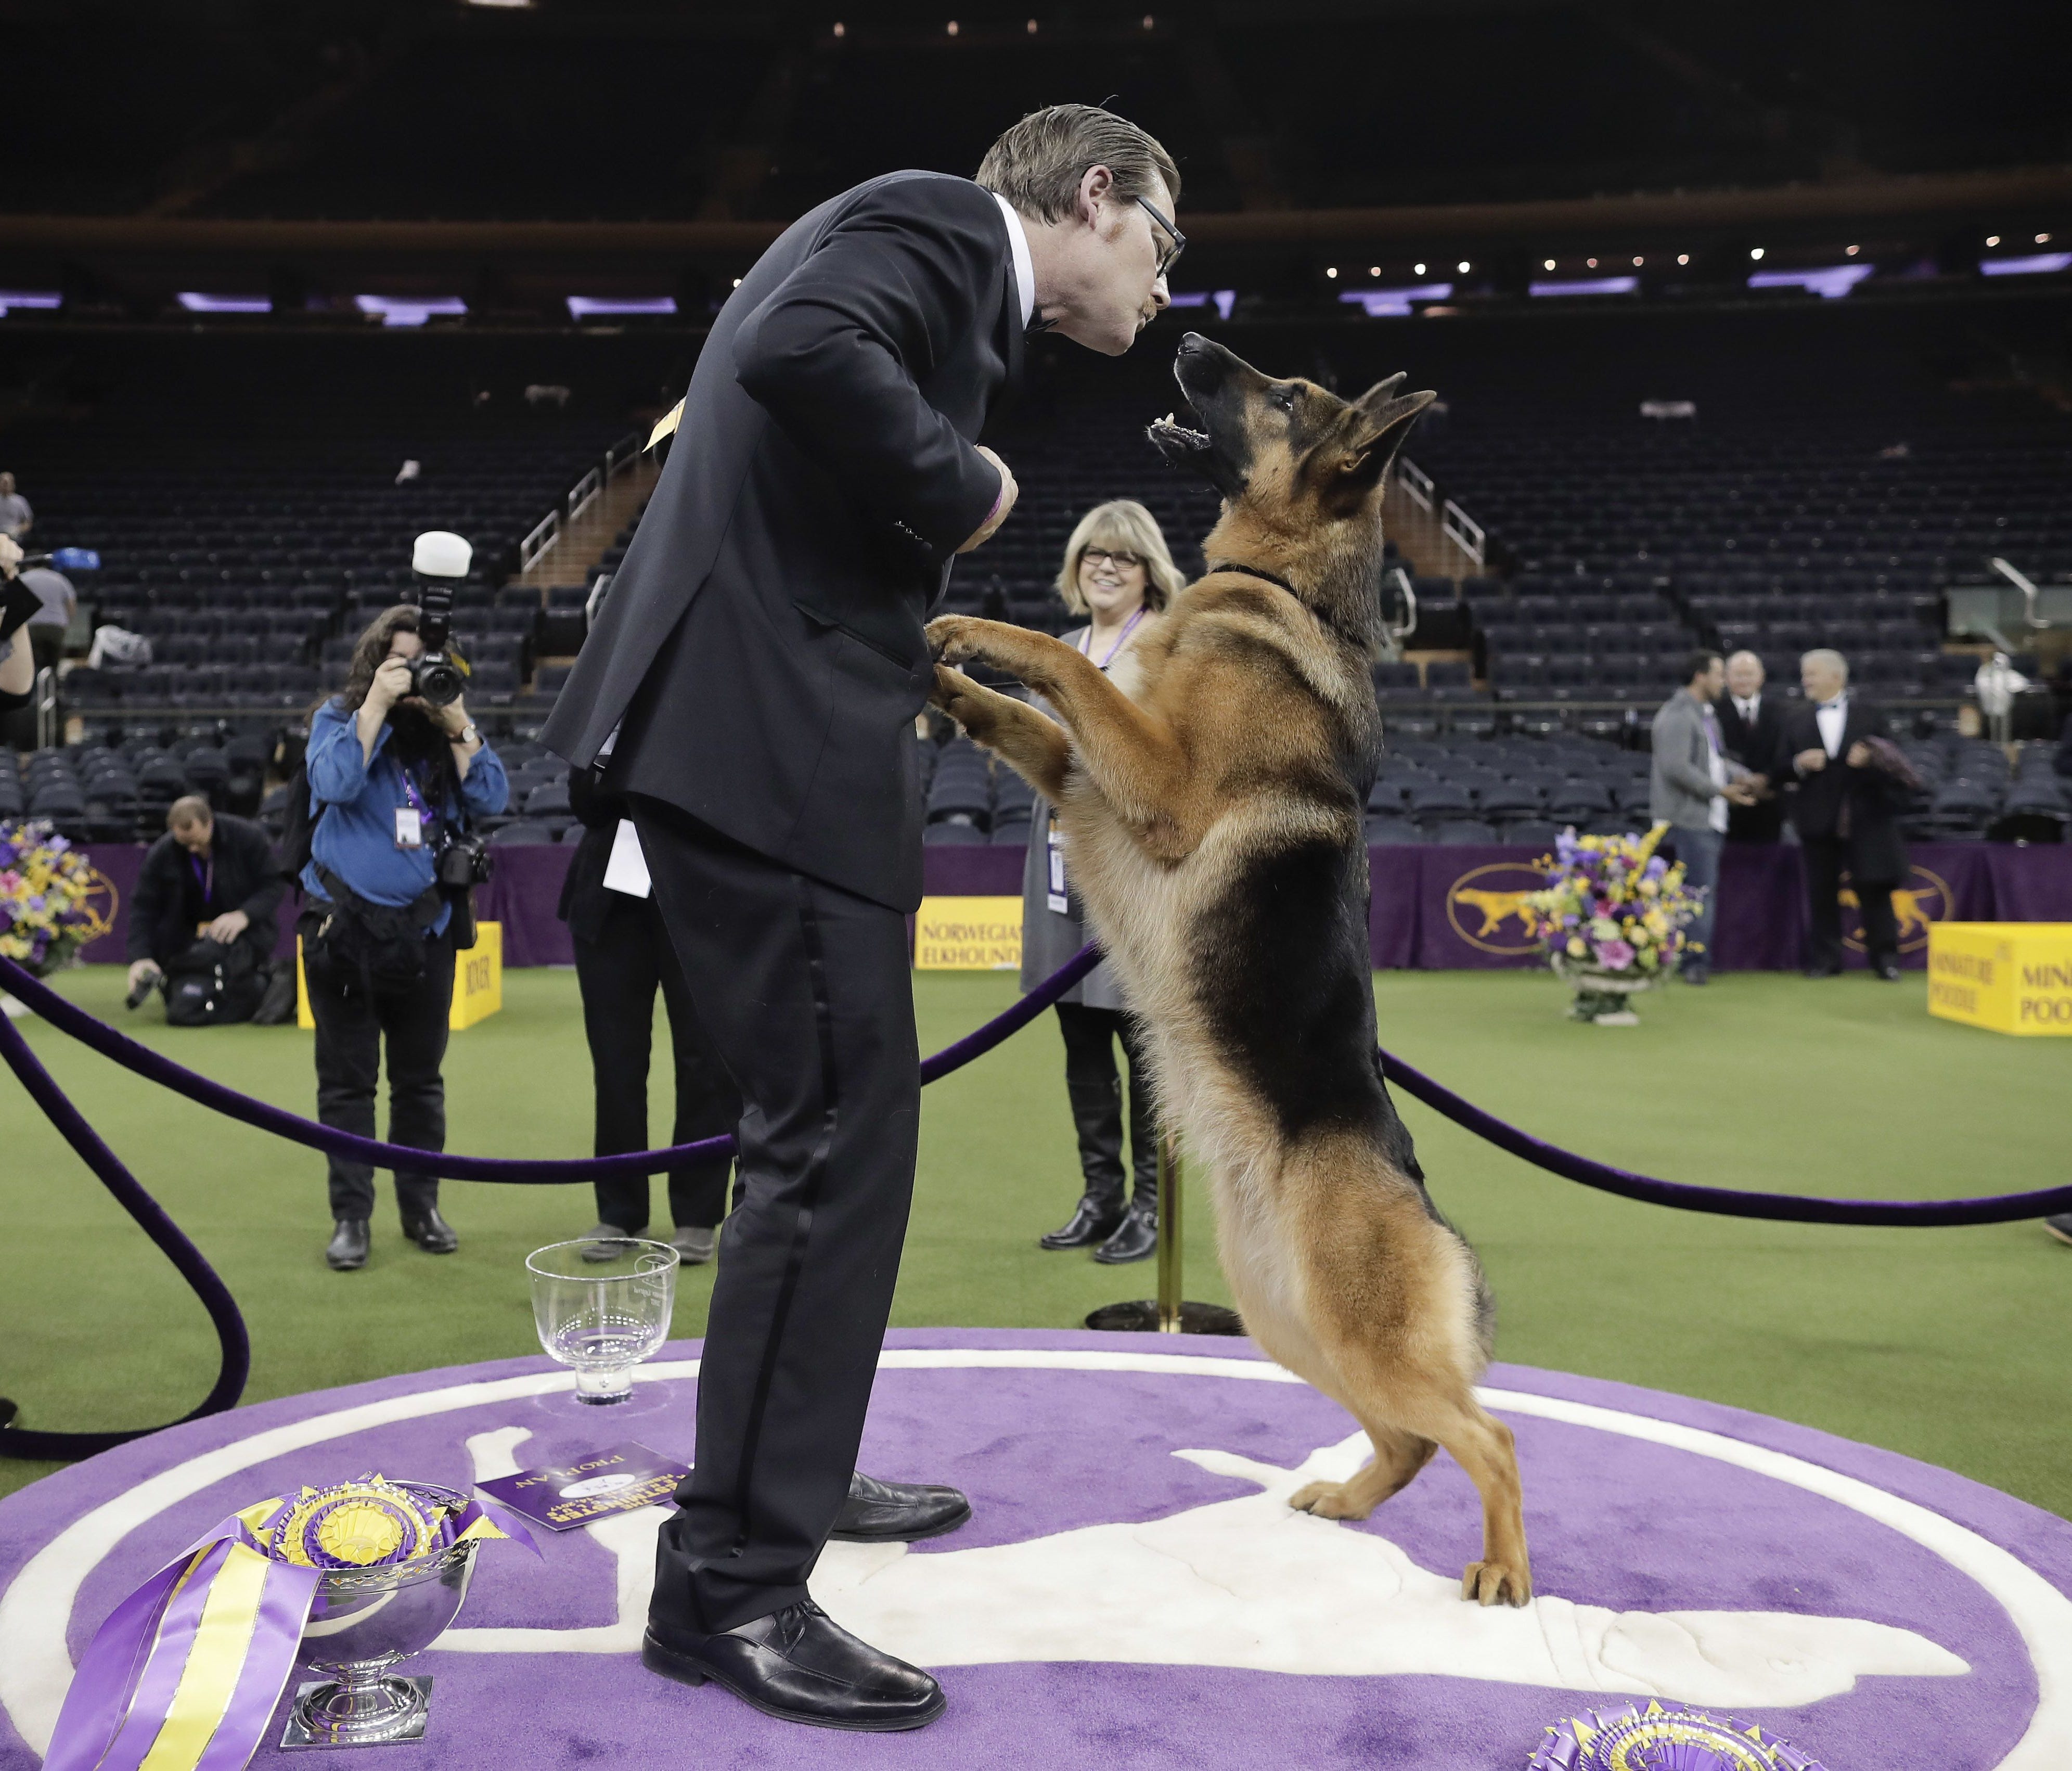 Rumor, a German shepherd, leaps to lick her handler and co-owner Kent Boyles on the face after winning Best in Show at the 141st Westminster Kennel Club Dog Show.